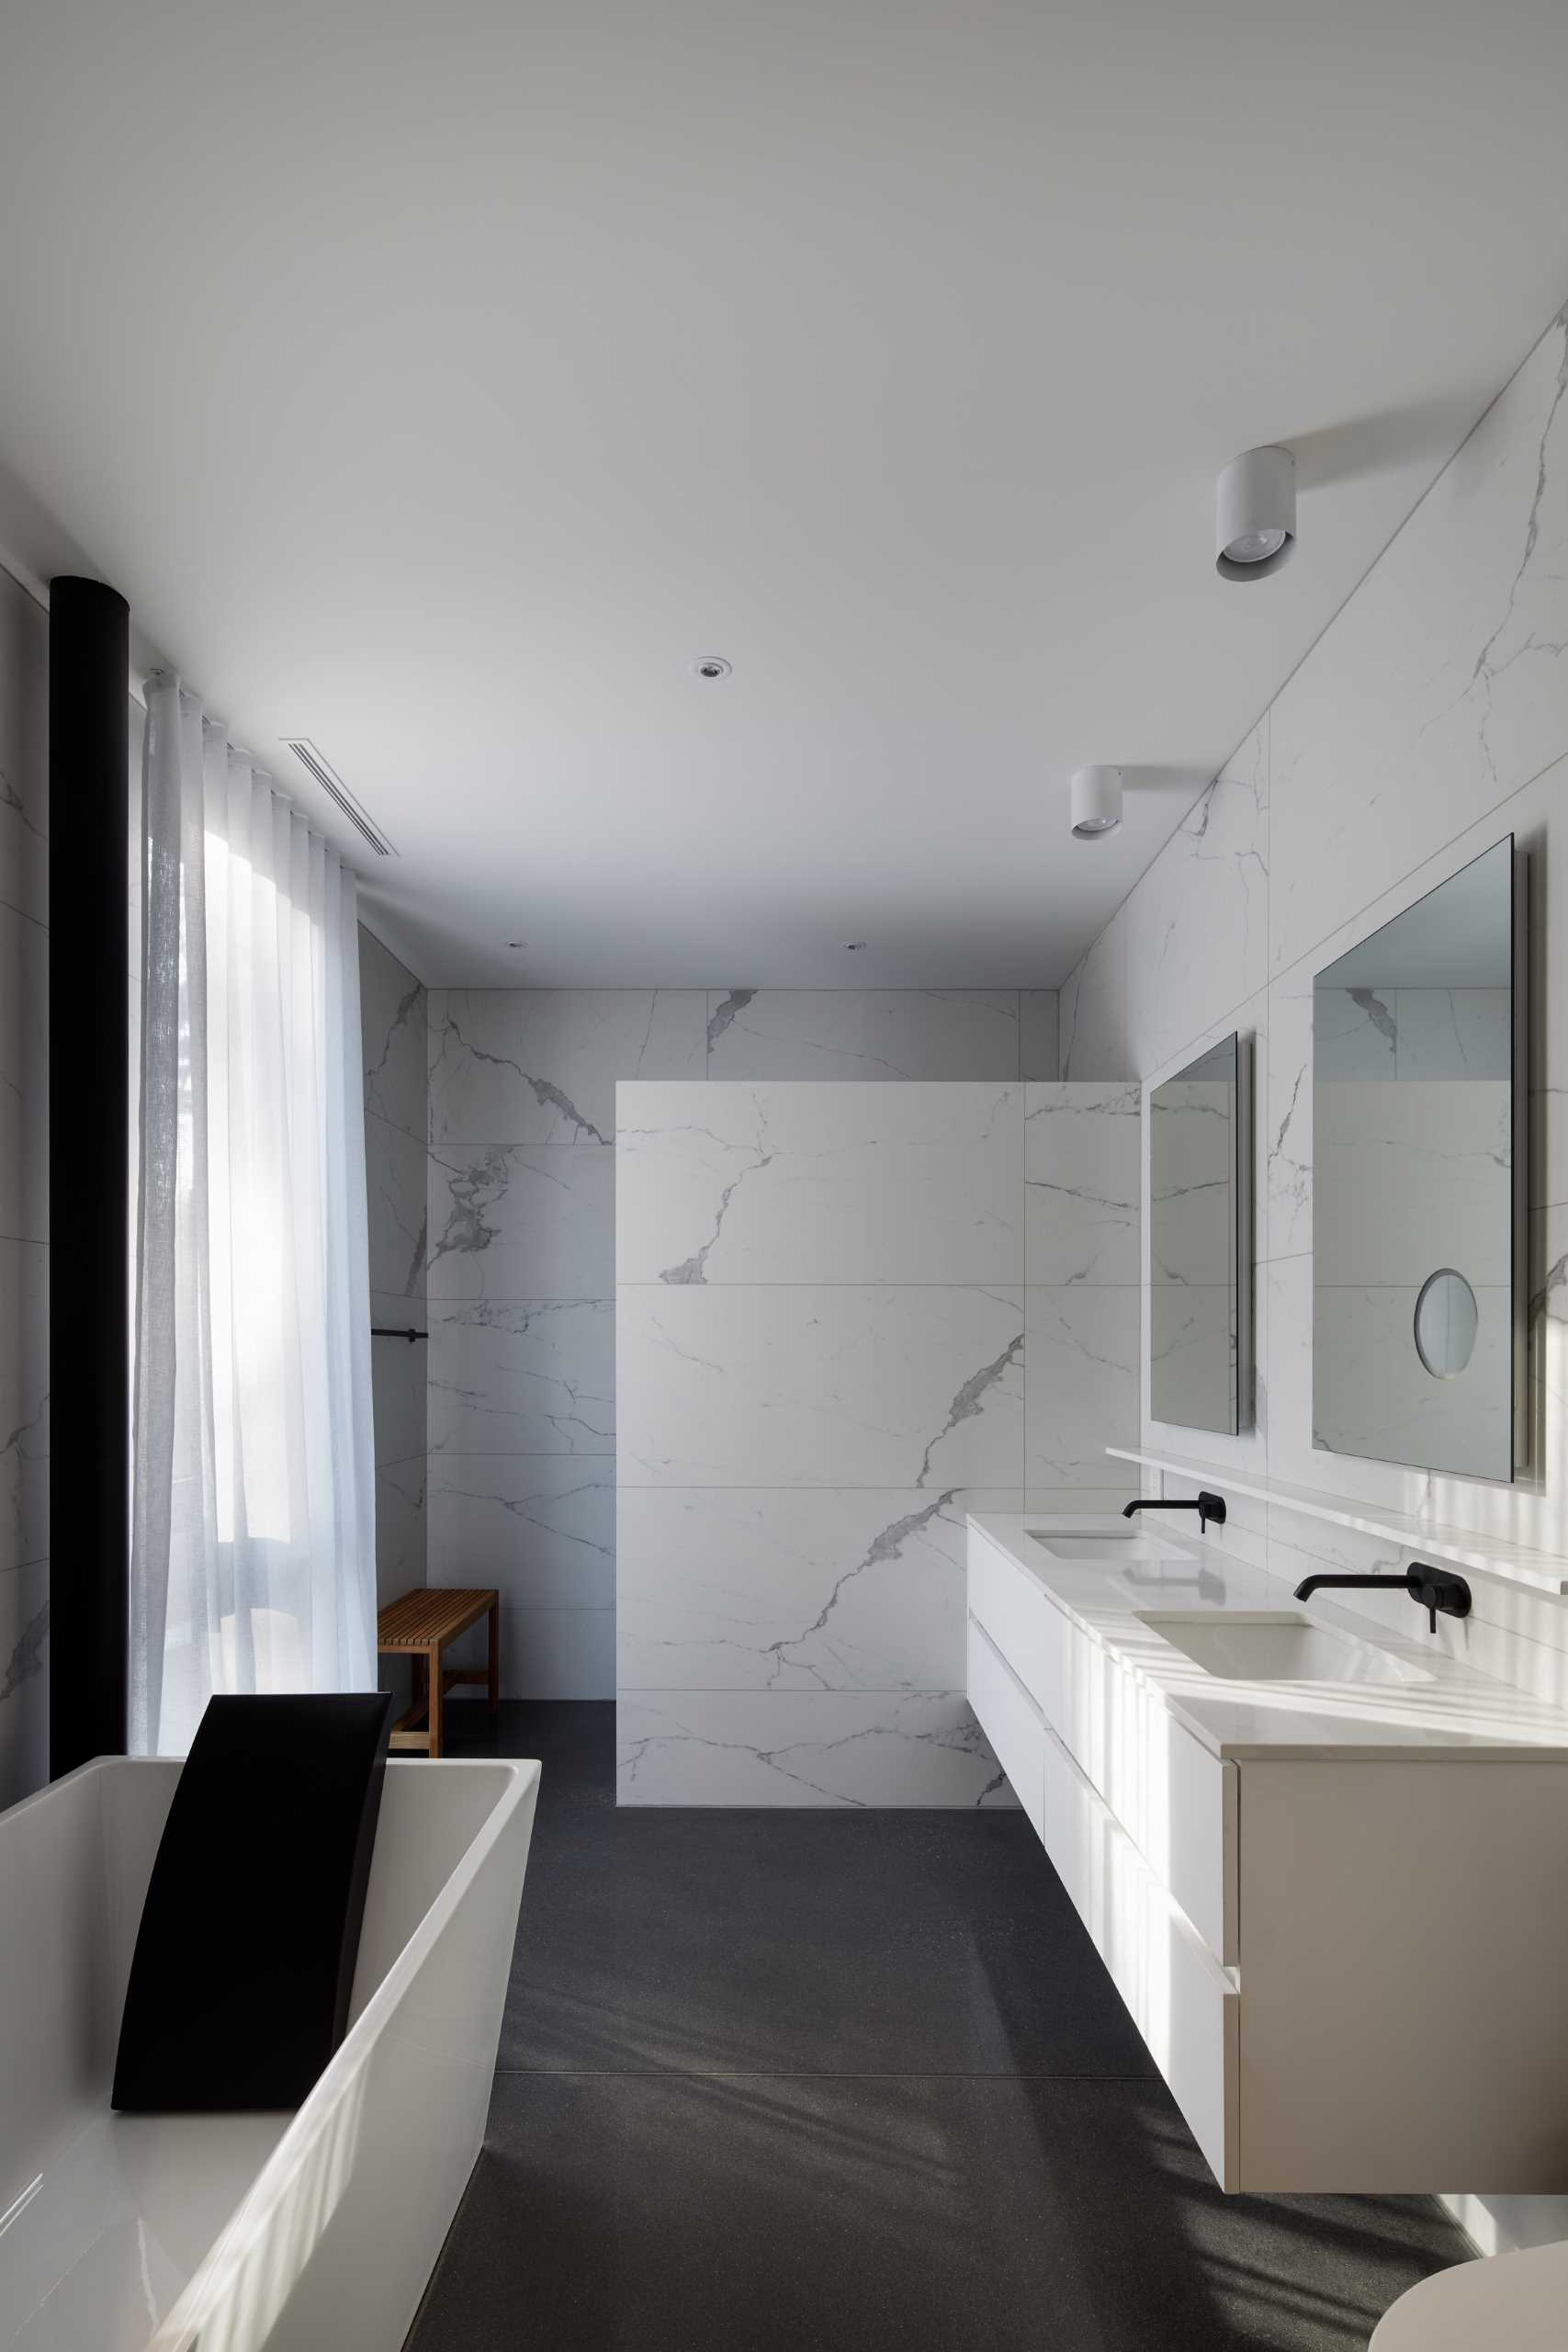 A modern bathroom with a black, white, and grey color palette.